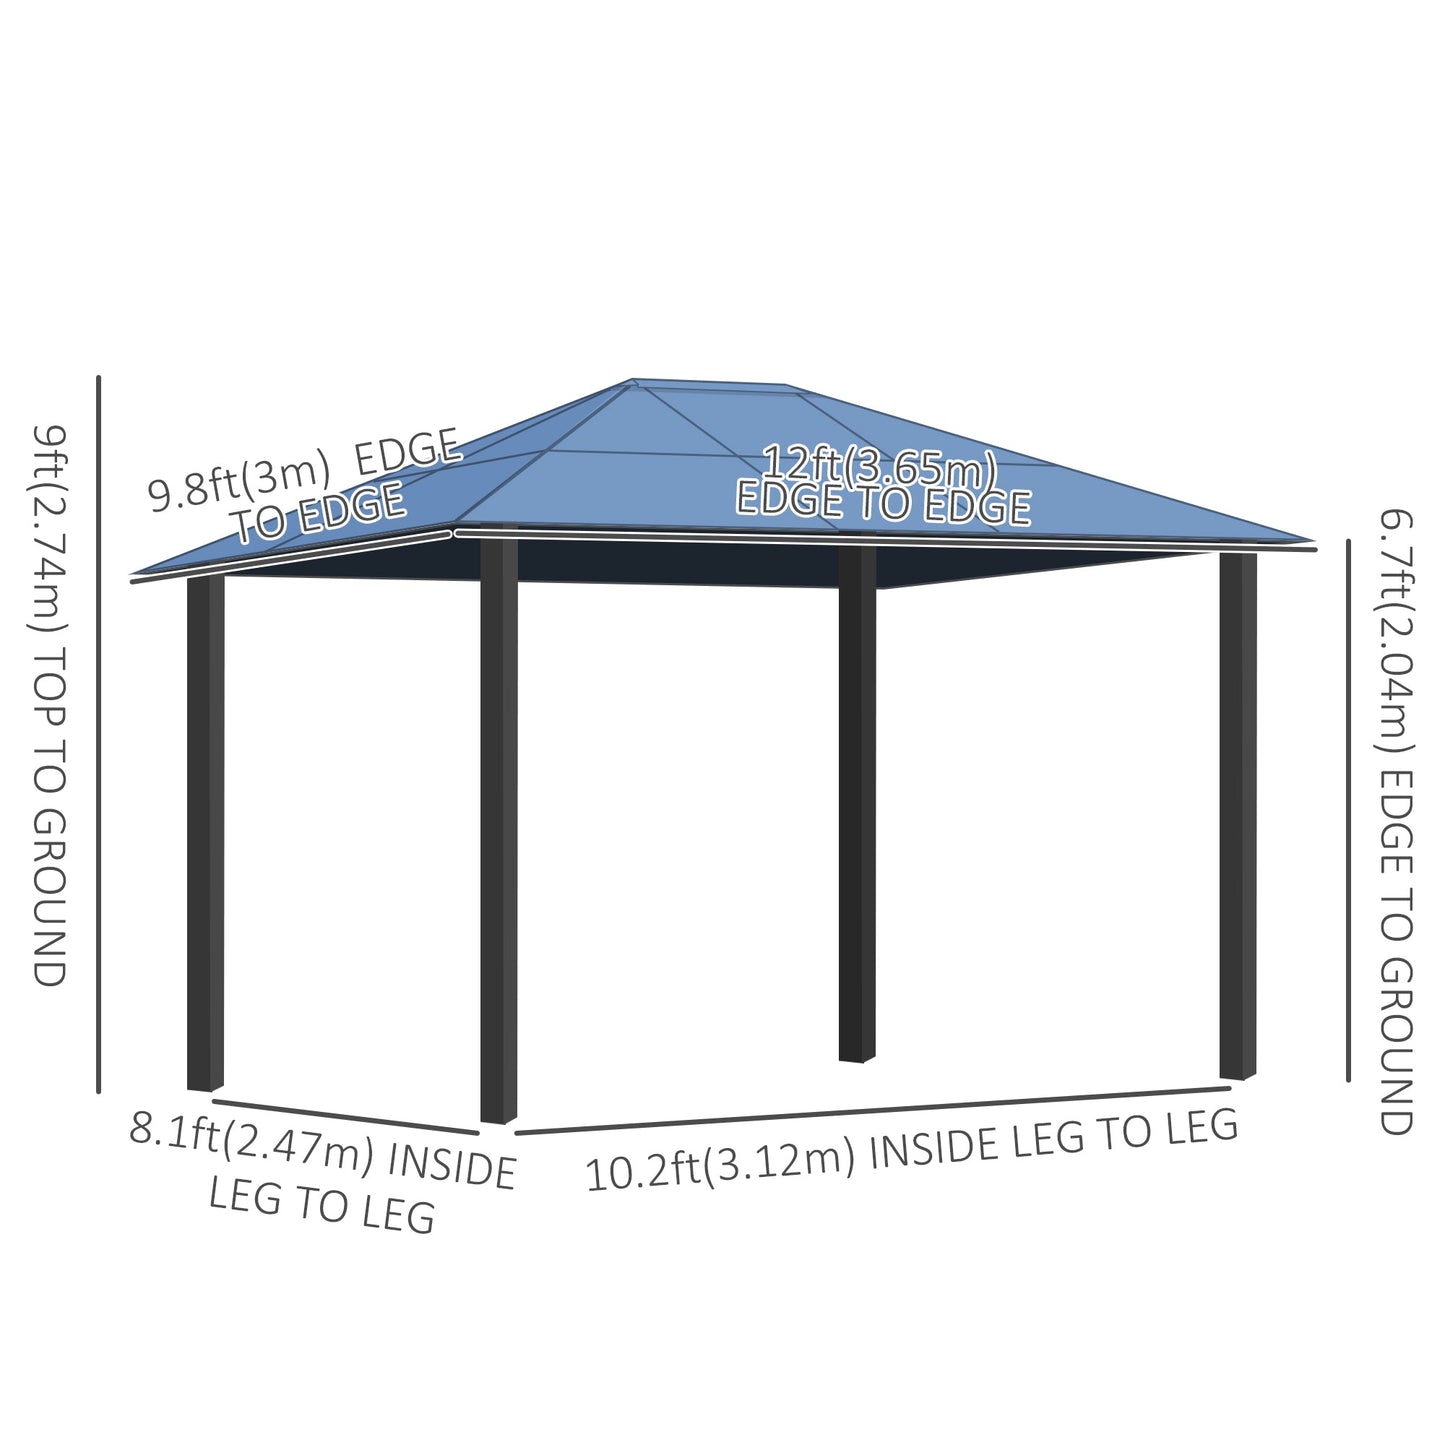 10' x 12' Outdoor Hardtop Gazebo with Polycarbonate Panel Roof, Garden Deluxe Pavilion Canopy BBQ Sunshade Shelter with Removable Curtains at Gallery Canada